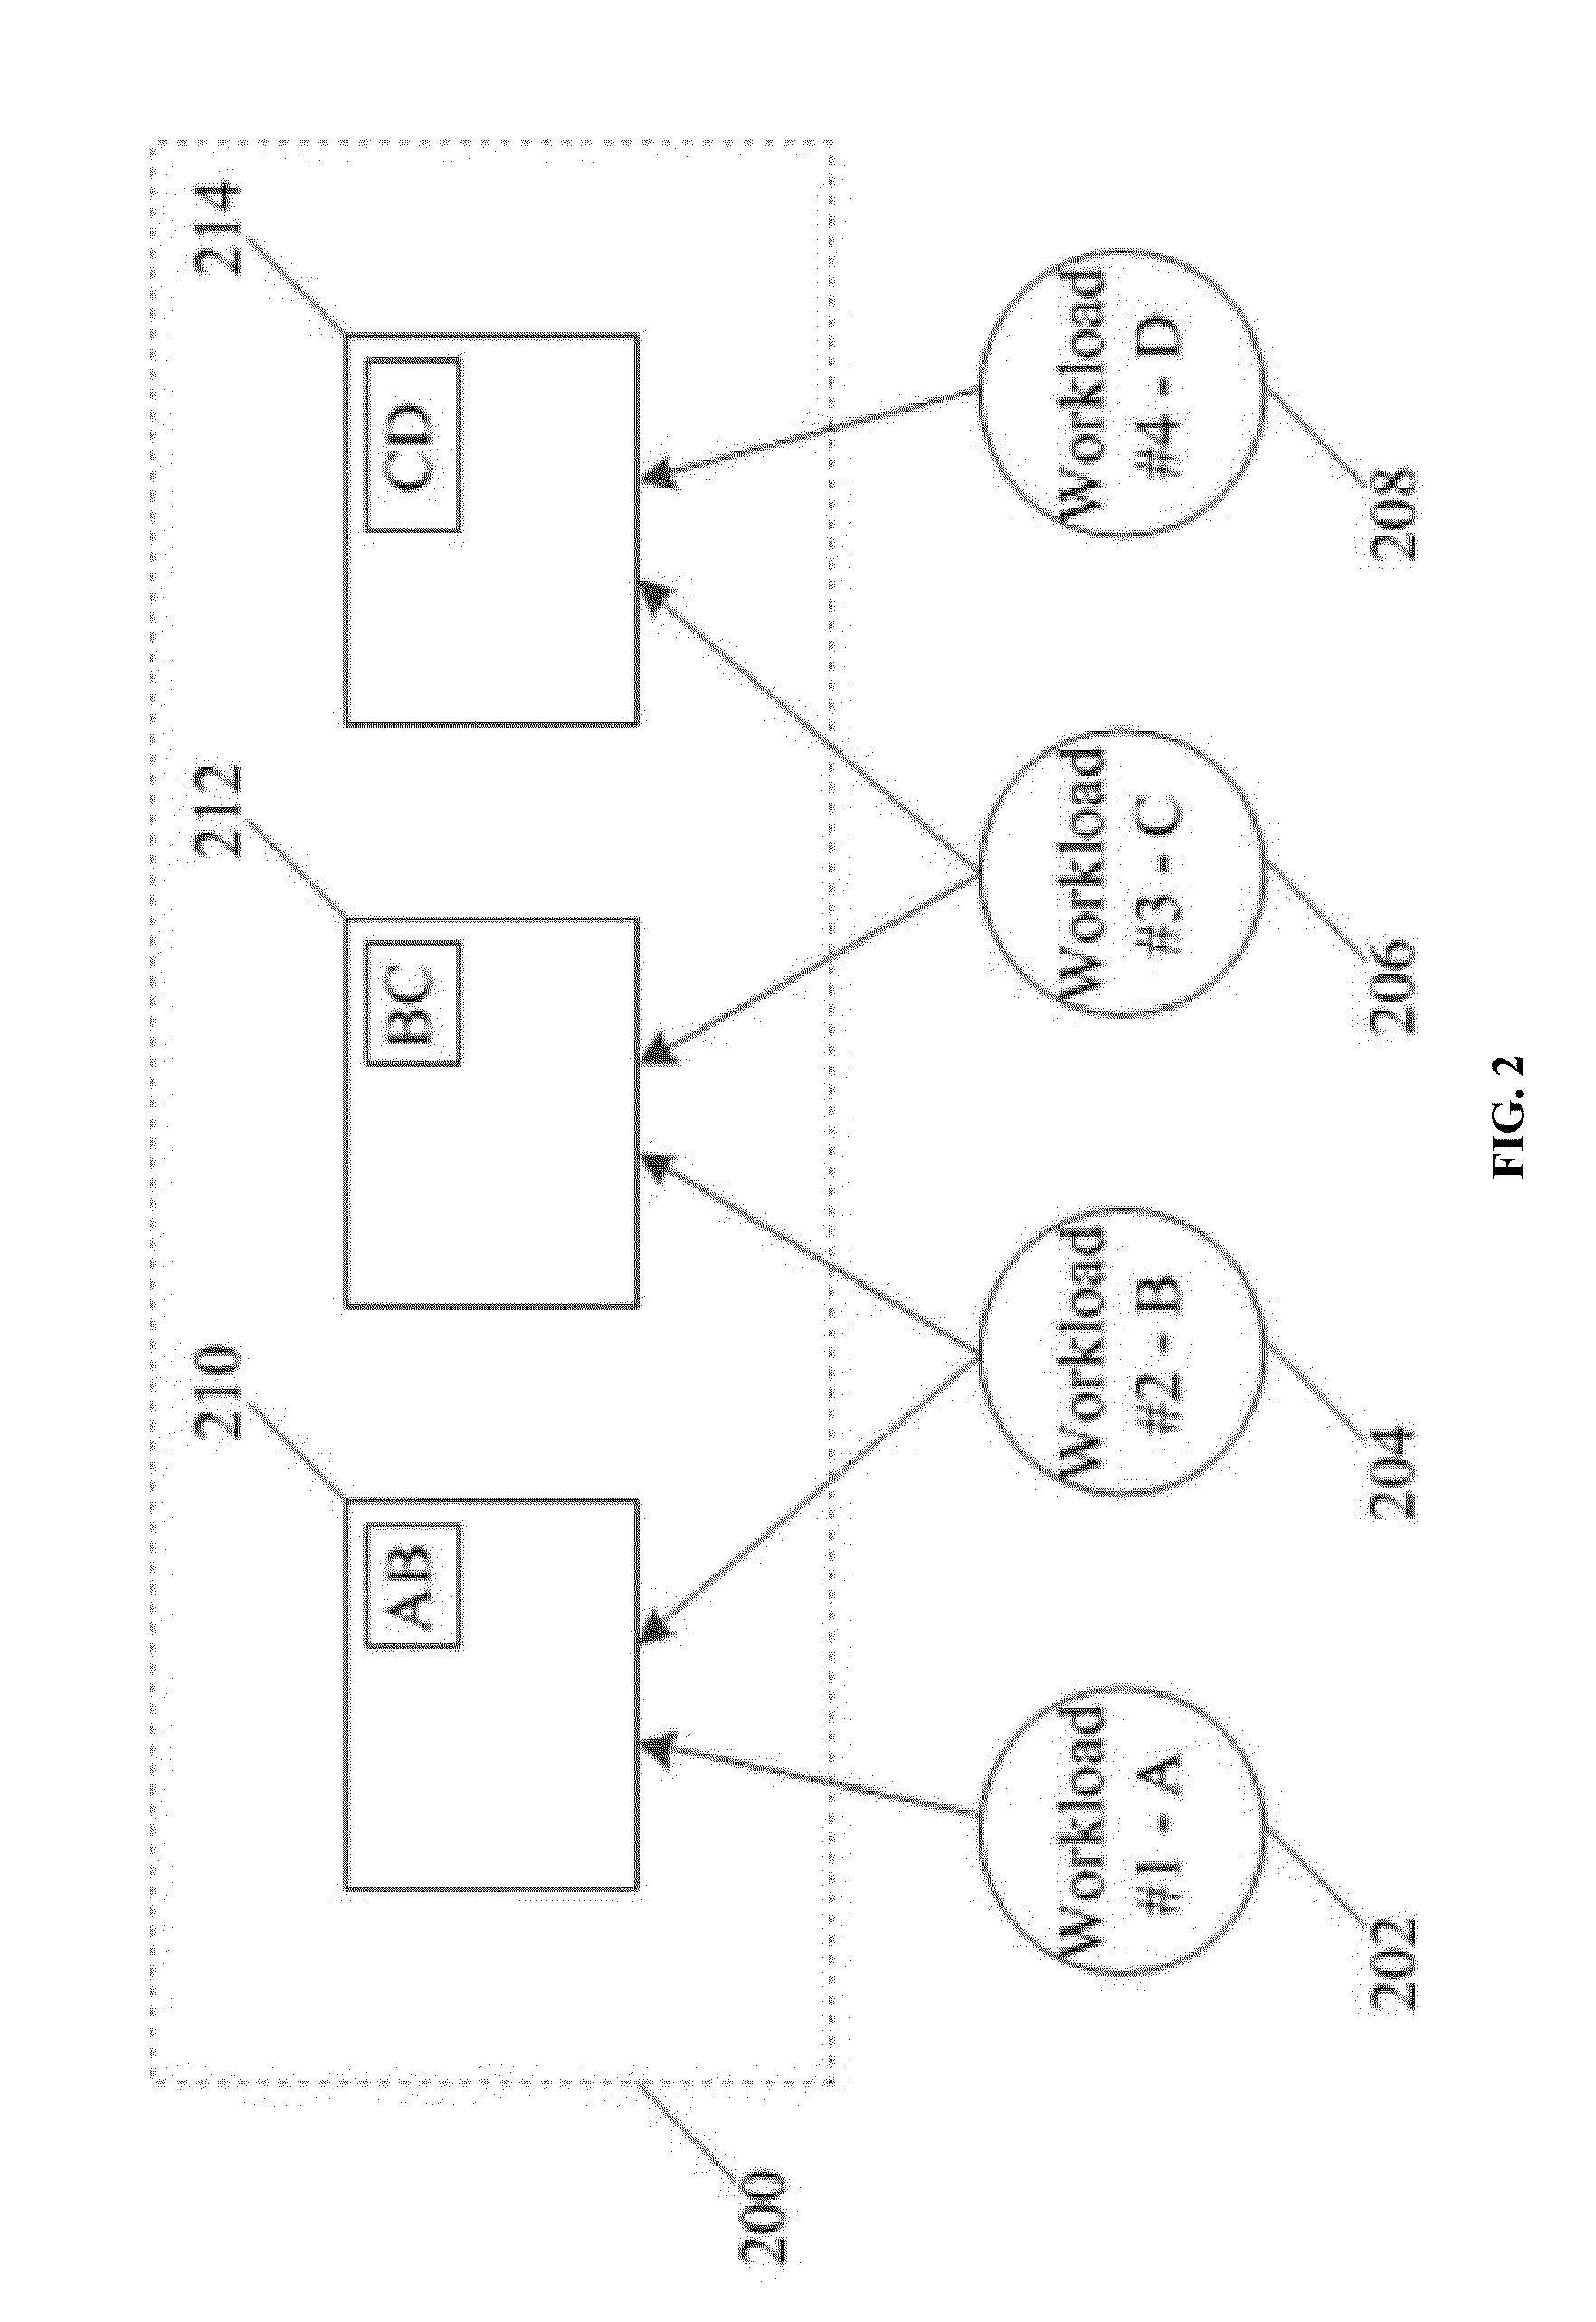 Methods and systems for dynamically specializing and re-purposing computer servers in an elastically scaling cloud computing infrastructure